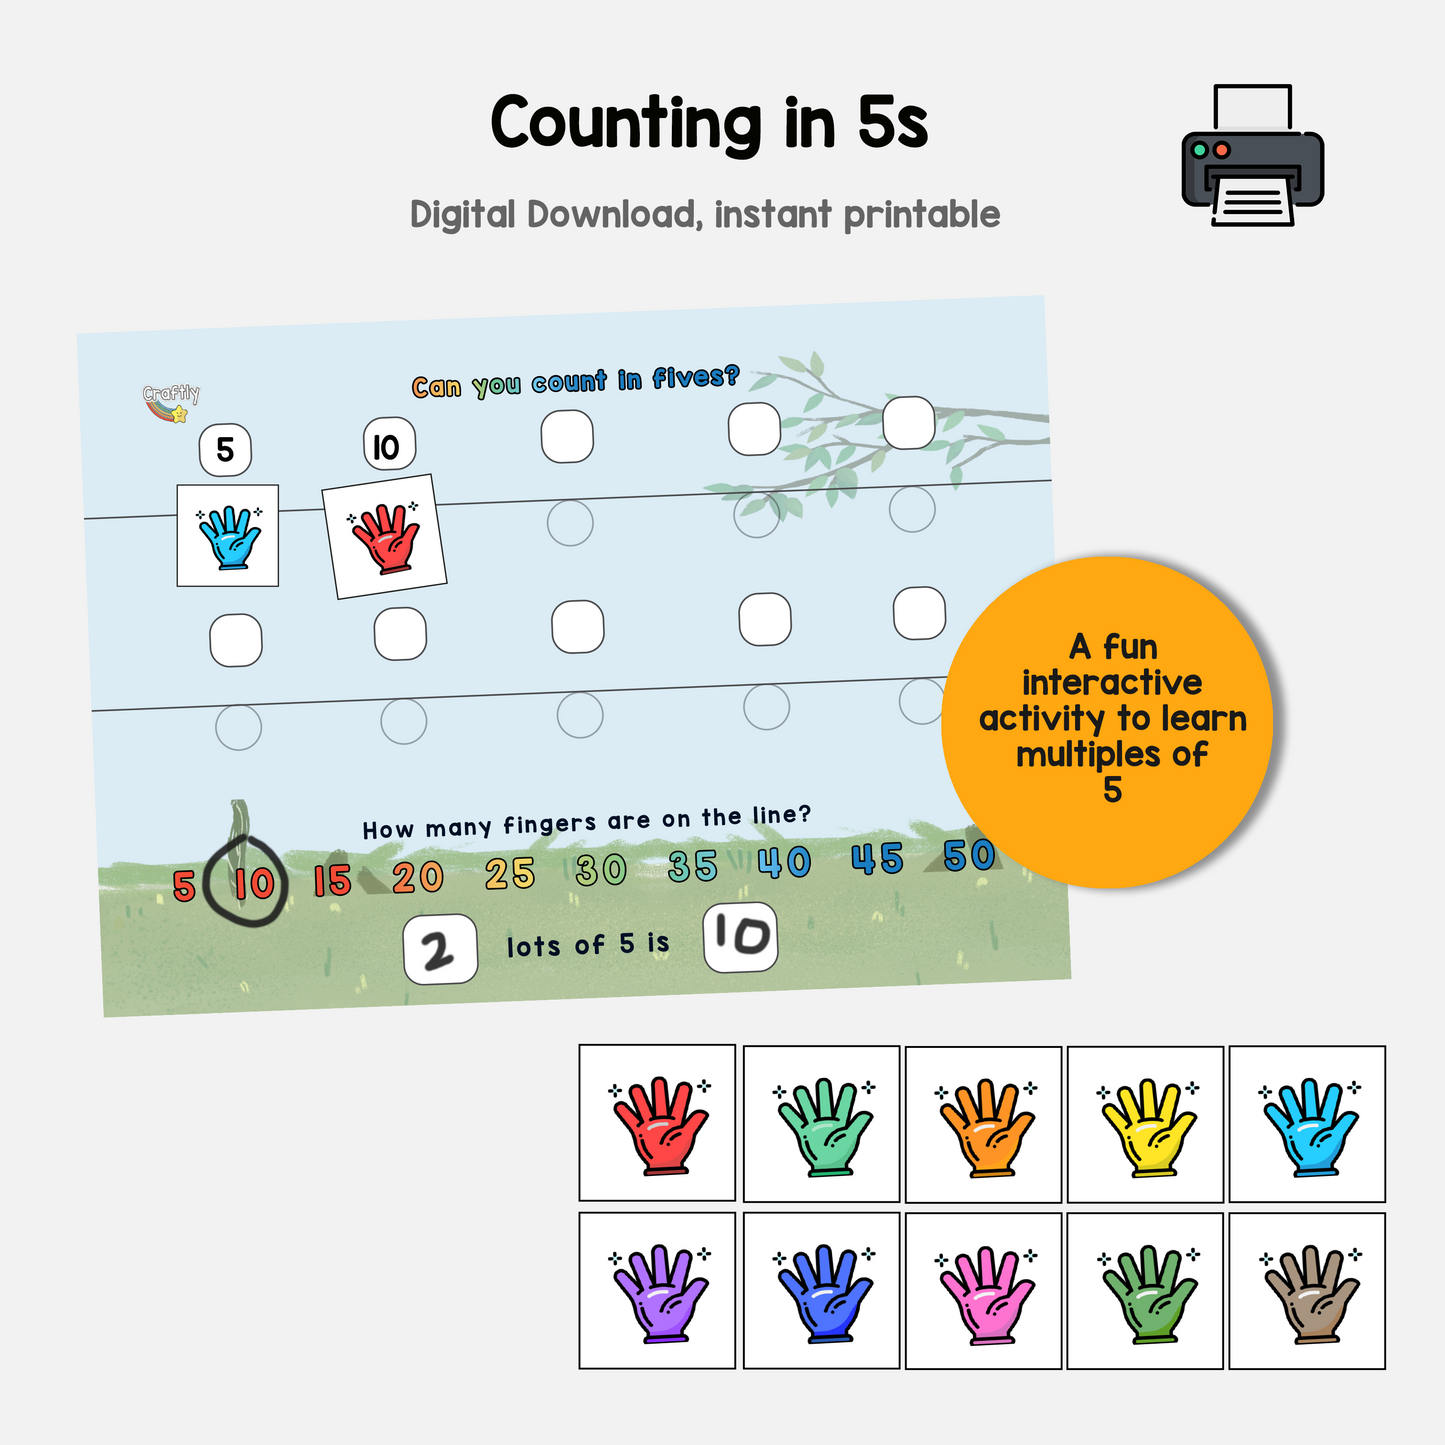 Counting in 5s Activity